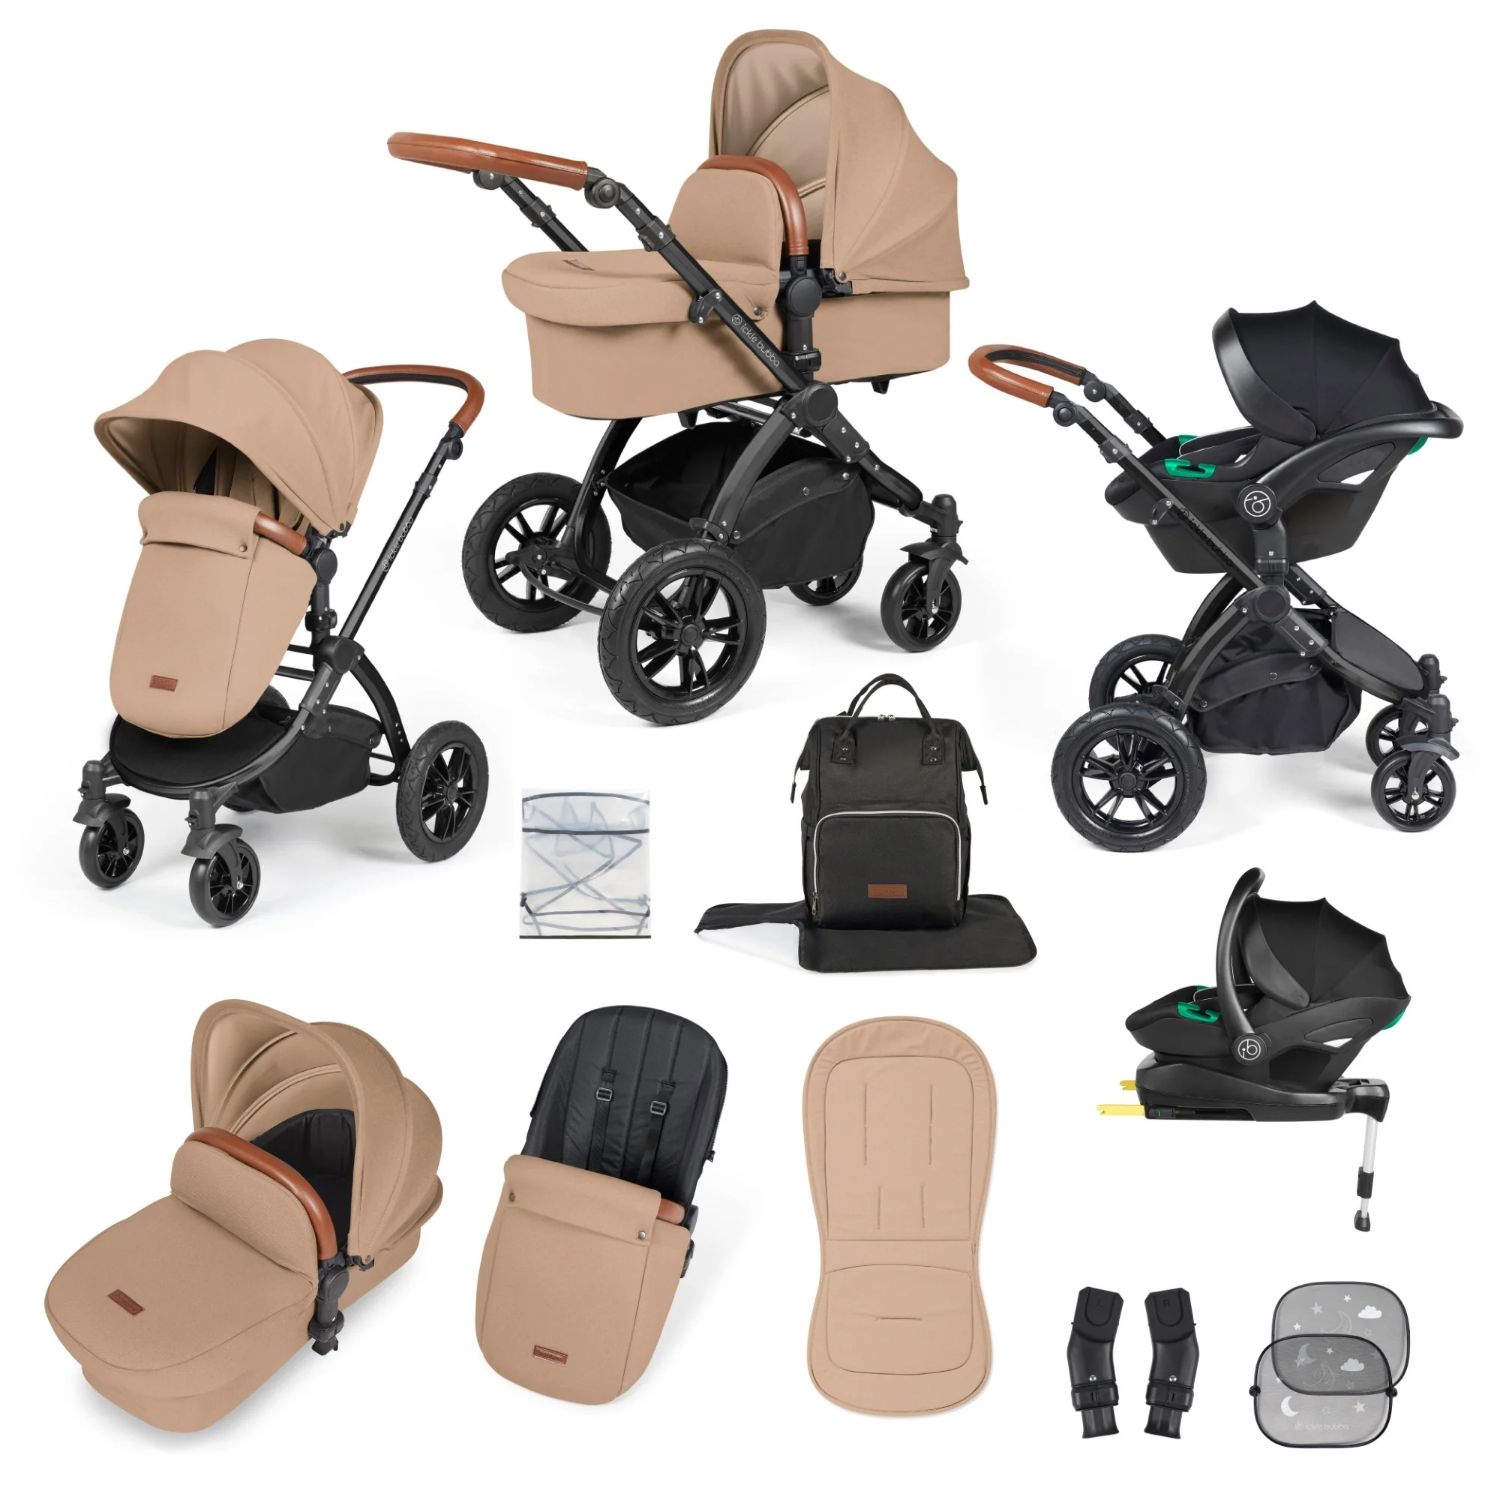 Ickle Bubba Stomp Luxe All-in-One Travel System with Stratus i-Size Car Seat and ISOFIX Base and accessories in Desert beige colour with tan handle